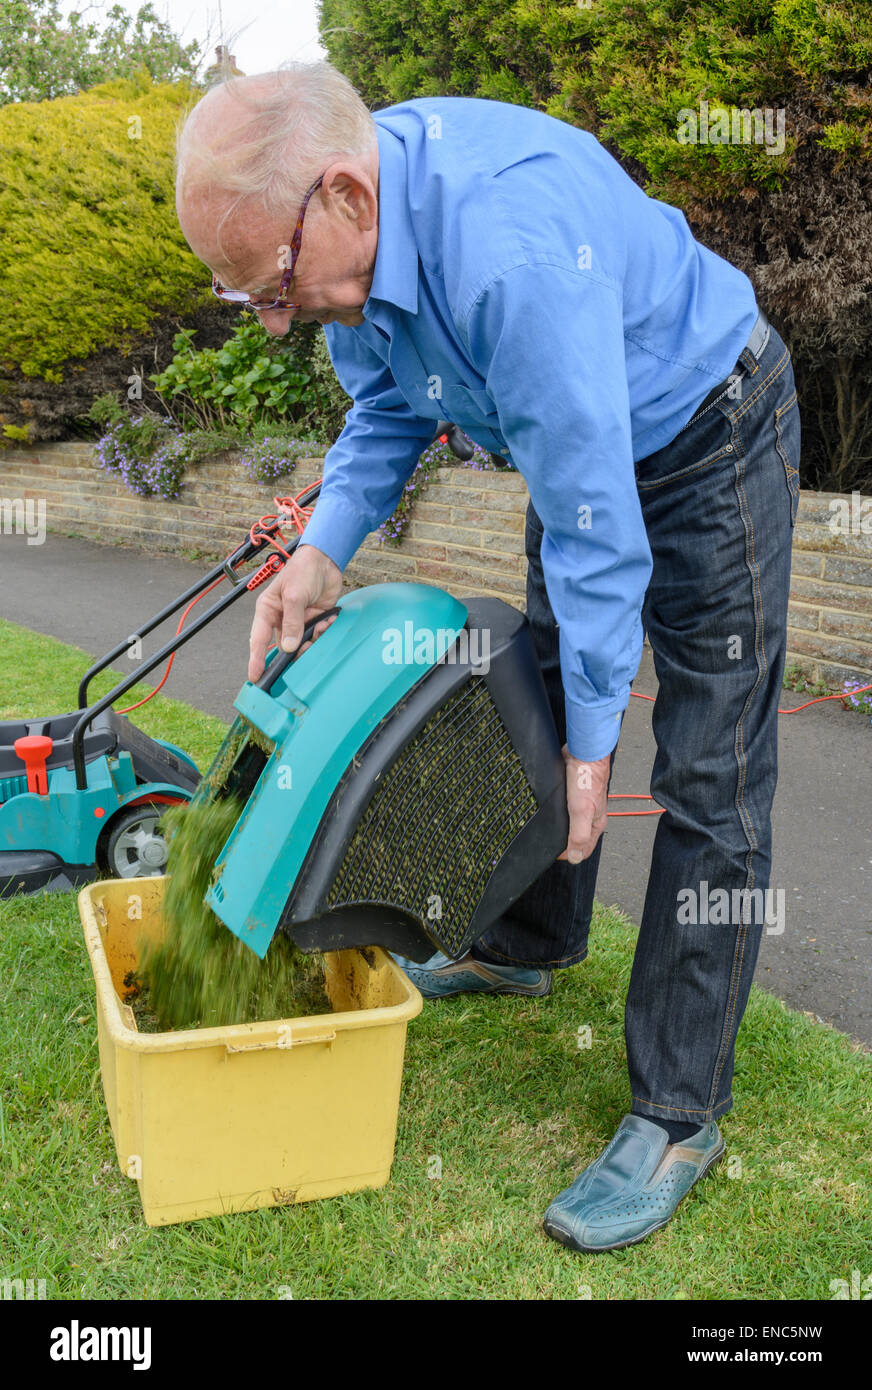 Elderly man emptying a grass box from a lawnmower, showing movement of the grass. Stock Photo